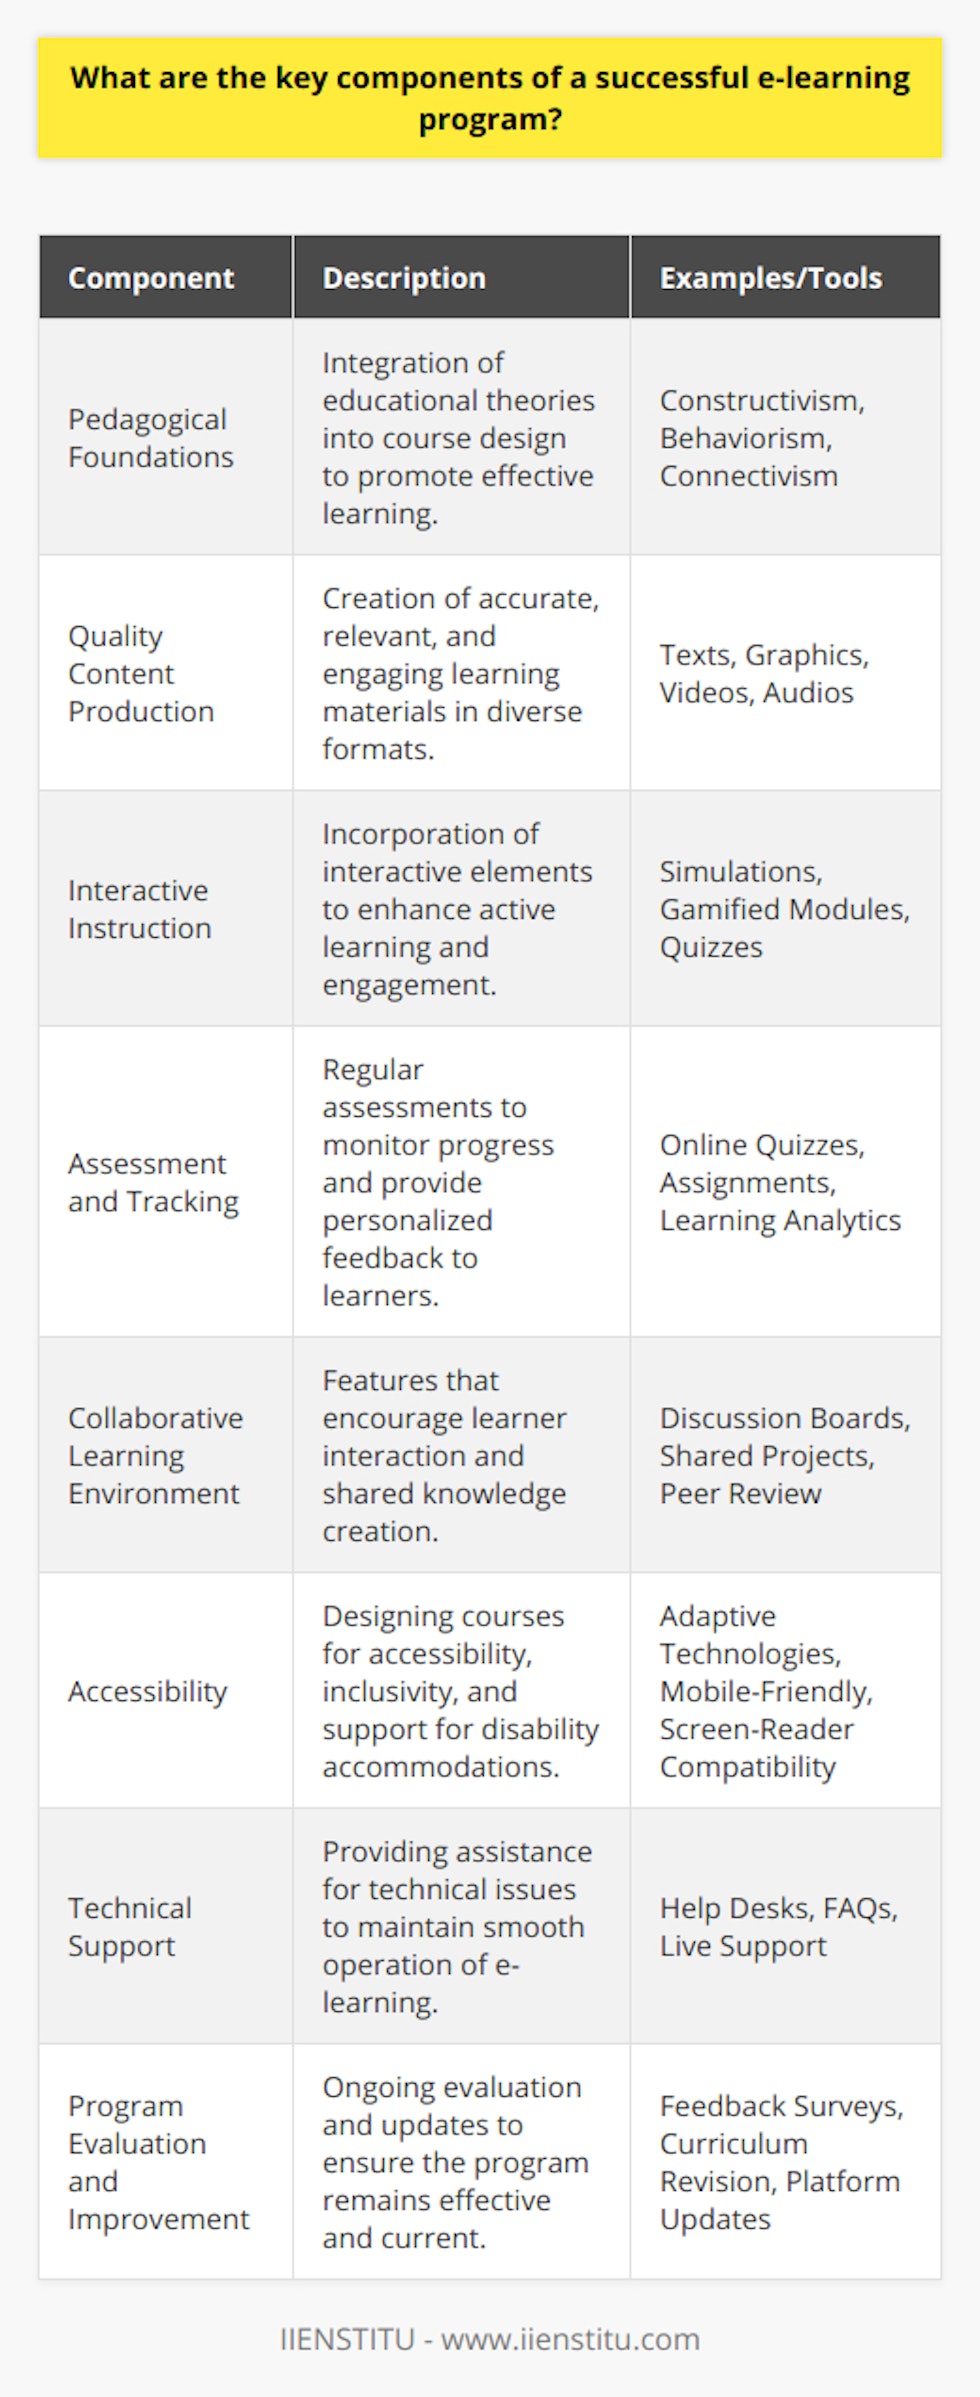 A successful e-learning program is founded on a well-designed strategy that incorporates several critical components, each contributing to a robust and effective learning experience. Below are the key elements that underpin a strong e-learning program:1. **Pedagogical Foundations**: Any e-learning course must have a strong underpinning in pedagogical theory. This involves applying research-backed strategies to the instructional design process, ensuring that online content is aligned with the best practices in education and encourages effective learning. Pedagogies such as constructivism, behaviorism, or connectivism might be applied depending on the learning outcomes desired.2. **Quality Content Production**: The cornerstone of e-learning is the content that is shared with students. This content must be well-curated and professionally produced. It should be relevant, accurate, and up-to-date, catering to the identified learning needs and objectives. A mix of formats such as text, graphics, video, and audio can cater to various learning styles and maintain engagement.3. **Interactive Instruction**: Interactive elements are vital in maintaining student engagement and facilitating the application of knowledge. Simulations, gamified learning modules, and interactive quizzes or mind maps can transform passive content consumption into an active learning process.4. **Assessment and Tracking**: Regular assessments allow learners to gauge their progress and understanding of the subject matter. Furthermore, these assessments help educators to track performance and provide personalized feedback. Outcome tracking is also critical to identify patterns in learning behavior and to inform potential content revisions.5. **Collaborative Learning Environment**: Collaboration is a powerful tool in e-learning. By incorporating features like discussion boards, shared projects, and peer review systems, e-learning programs recreate some of the communal aspects of traditional classrooms, enabling learners to benefit from each other’s insights and support.6. **Accessibility**: A program must be inclusive, ensuring that all students can access and benefit from the materials. This can involve using adaptive technologies, designing courses that are mobile-friendly, and including support for those with disabilities, such as screen-reader compatibility and caption options for videos.7. **Technical Support**: E-Learning heavily relies on technology, thus making technical support non-negotiable. A dedicated support team should be in place to assist students and faculty with any technical difficulties that may arise during the program, minimizing downtime and ensuring a seamless learning process.8. **Program Evaluation and Improvement**: Continuous improvement through regular evaluation ensures the e-learning program does not become obsolete. Feedback from students and educators can guide iterative changes to the curriculum, delivery platforms, and instructional methodologies, keeping the program at the cutting edge of educational standards. Successful e-learning programs, such as those offered by IIENSTITU, understand and implement these components to ensure a quality education is delivered regardless of distance. It’s this fusion of pedagogy, technology, content, and support that forms the bedrock of successful online learning experiences.